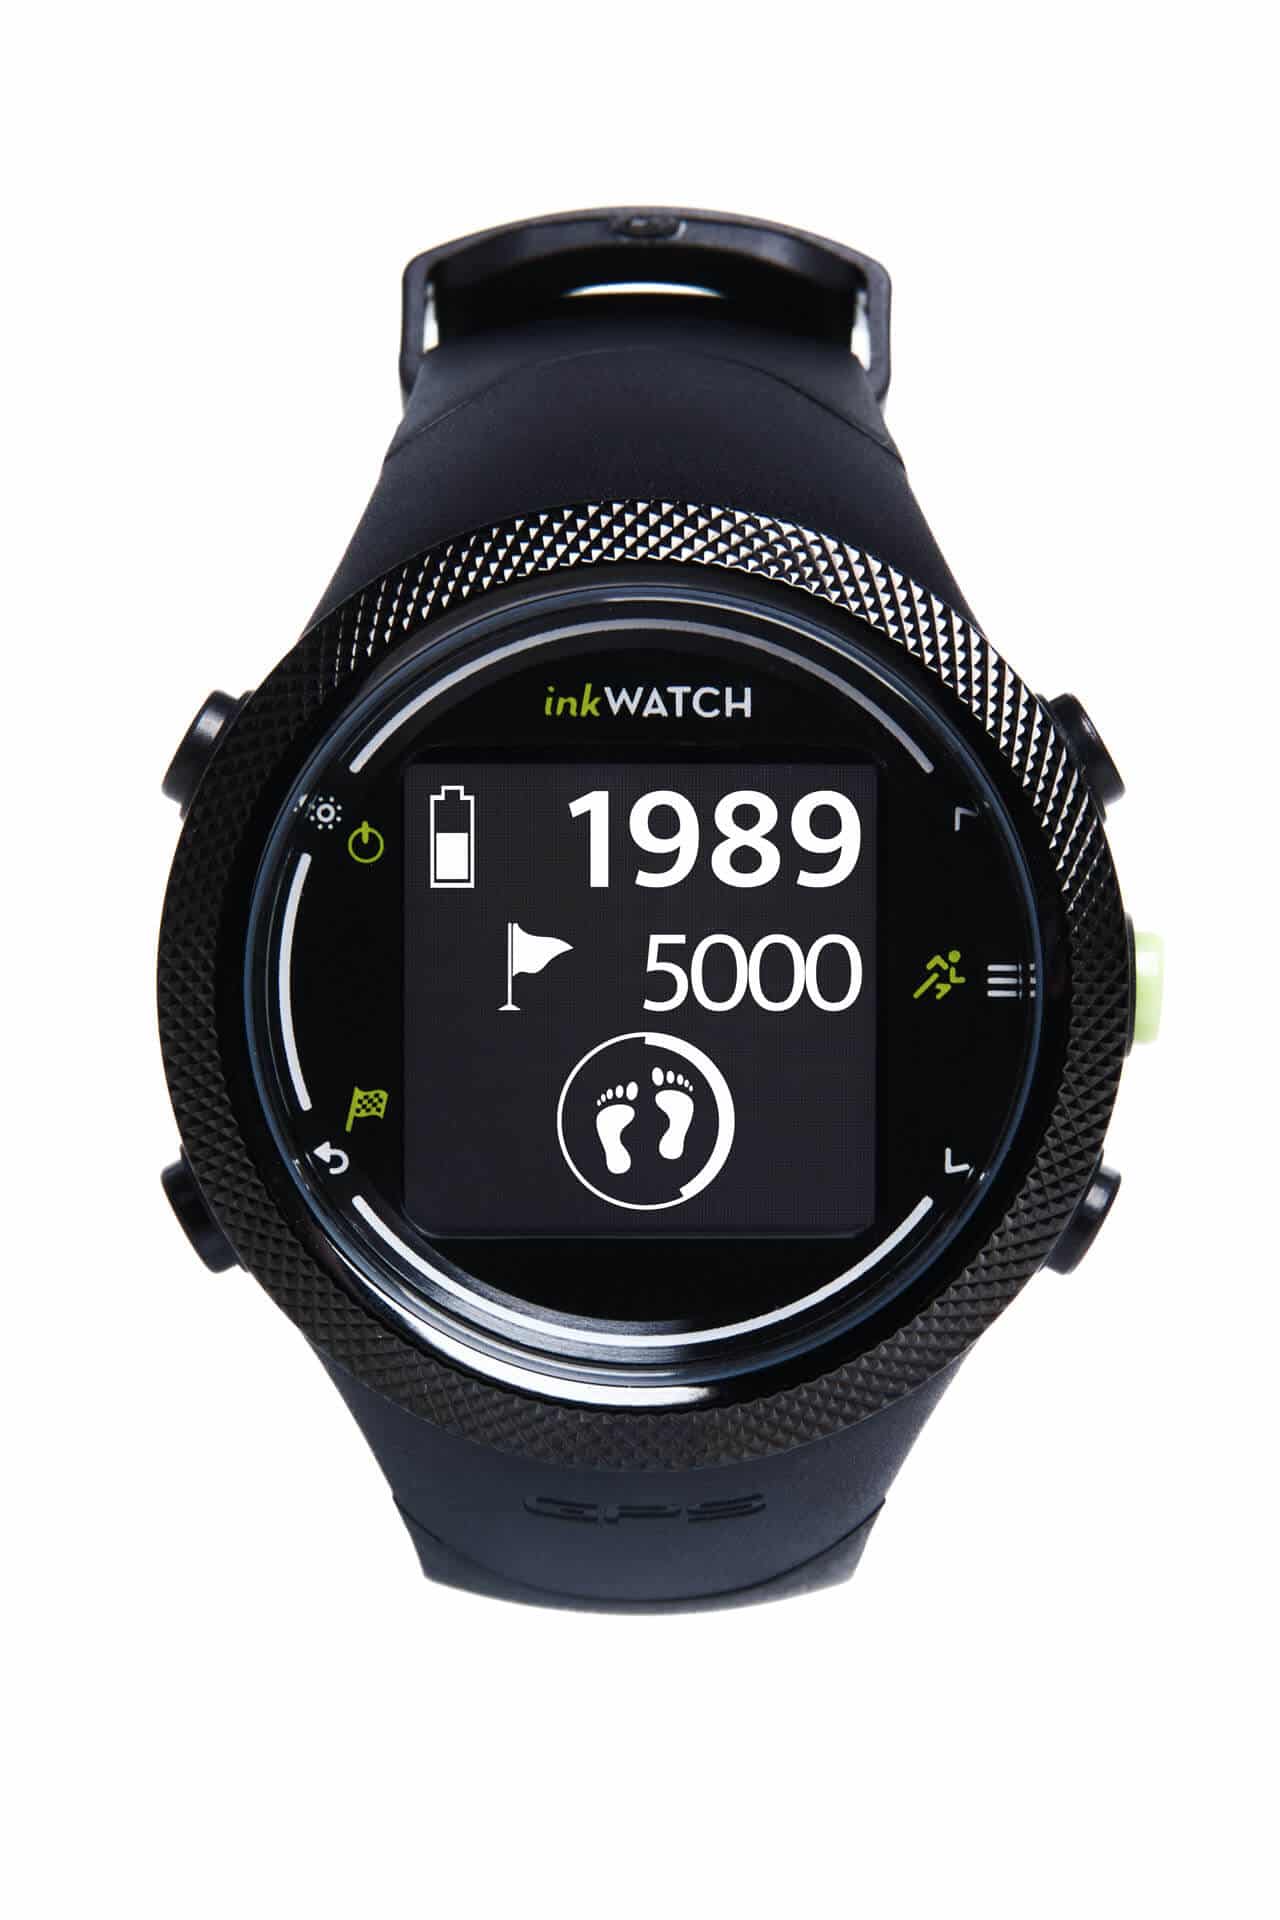 inkWATCH_TRIA_Plus_front_smart_band